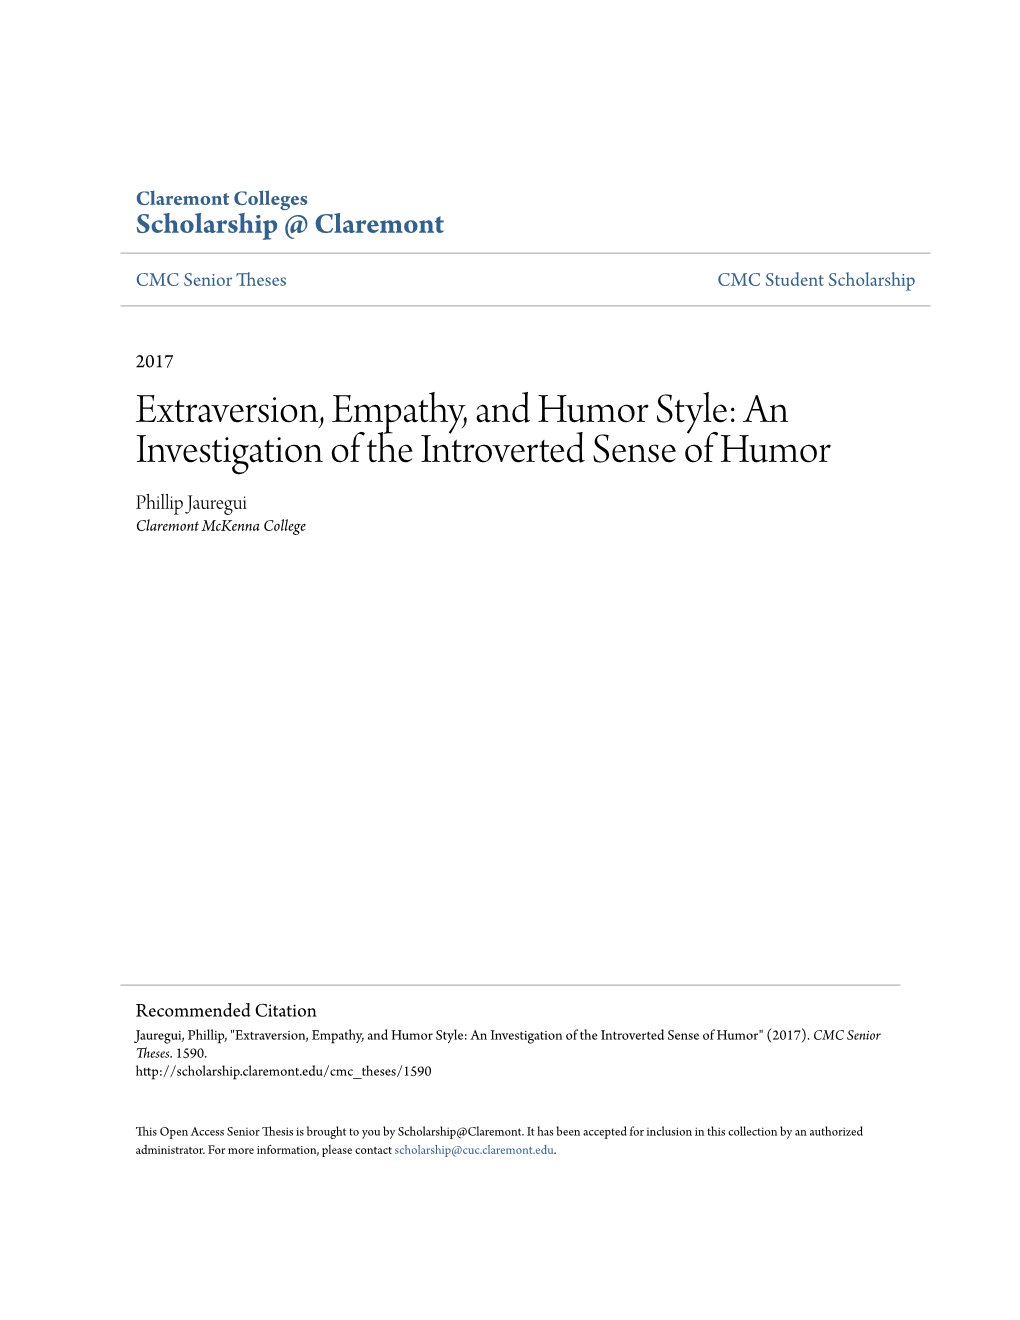 Extraversion, Empathy, and Humor Style: an Investigation of the Introverted Sense of Humor Phillip Jauregui Claremont Mckenna College